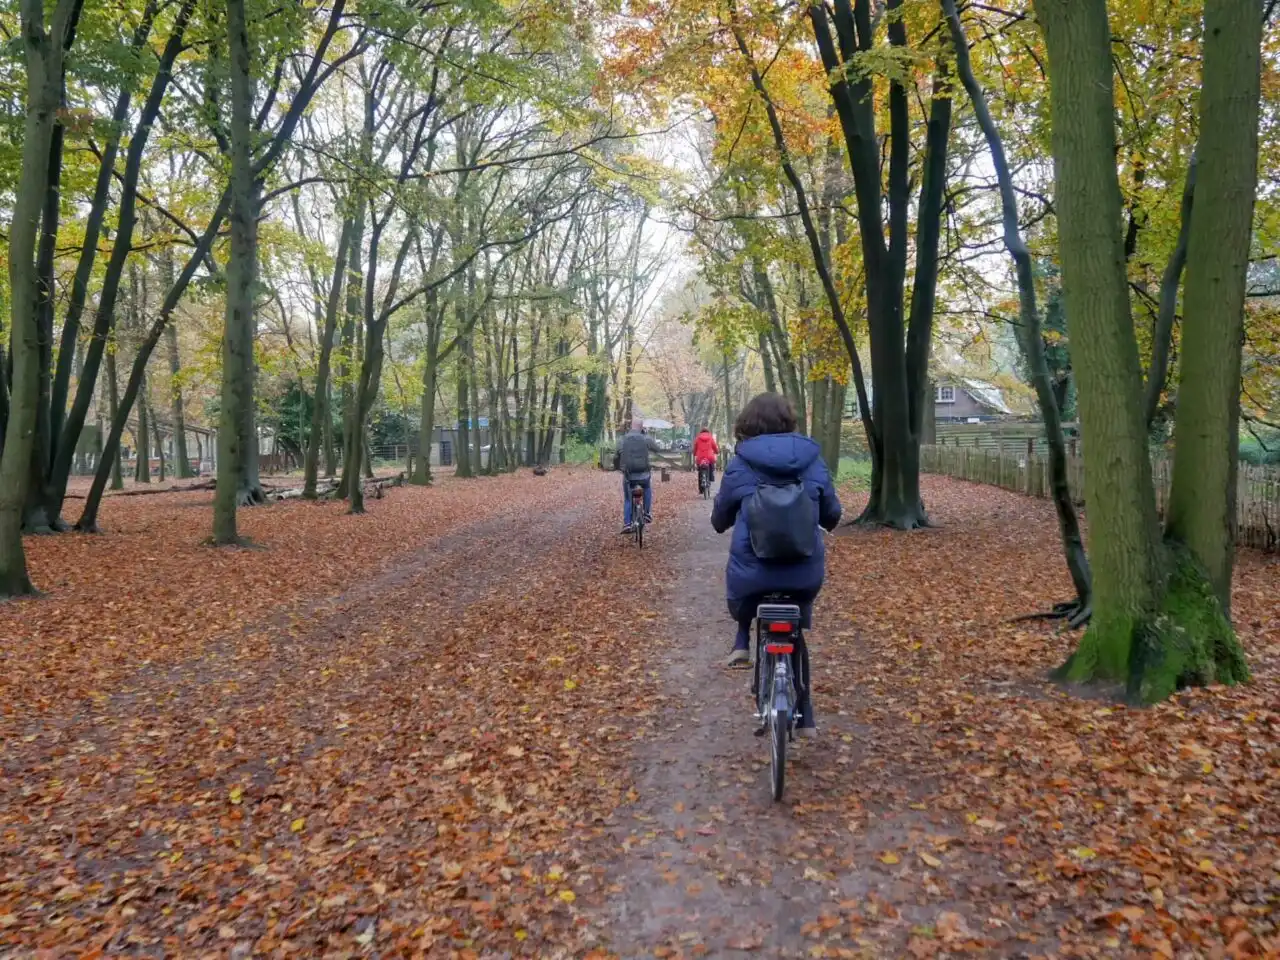 Riding a bycicle in the Amsterdam area